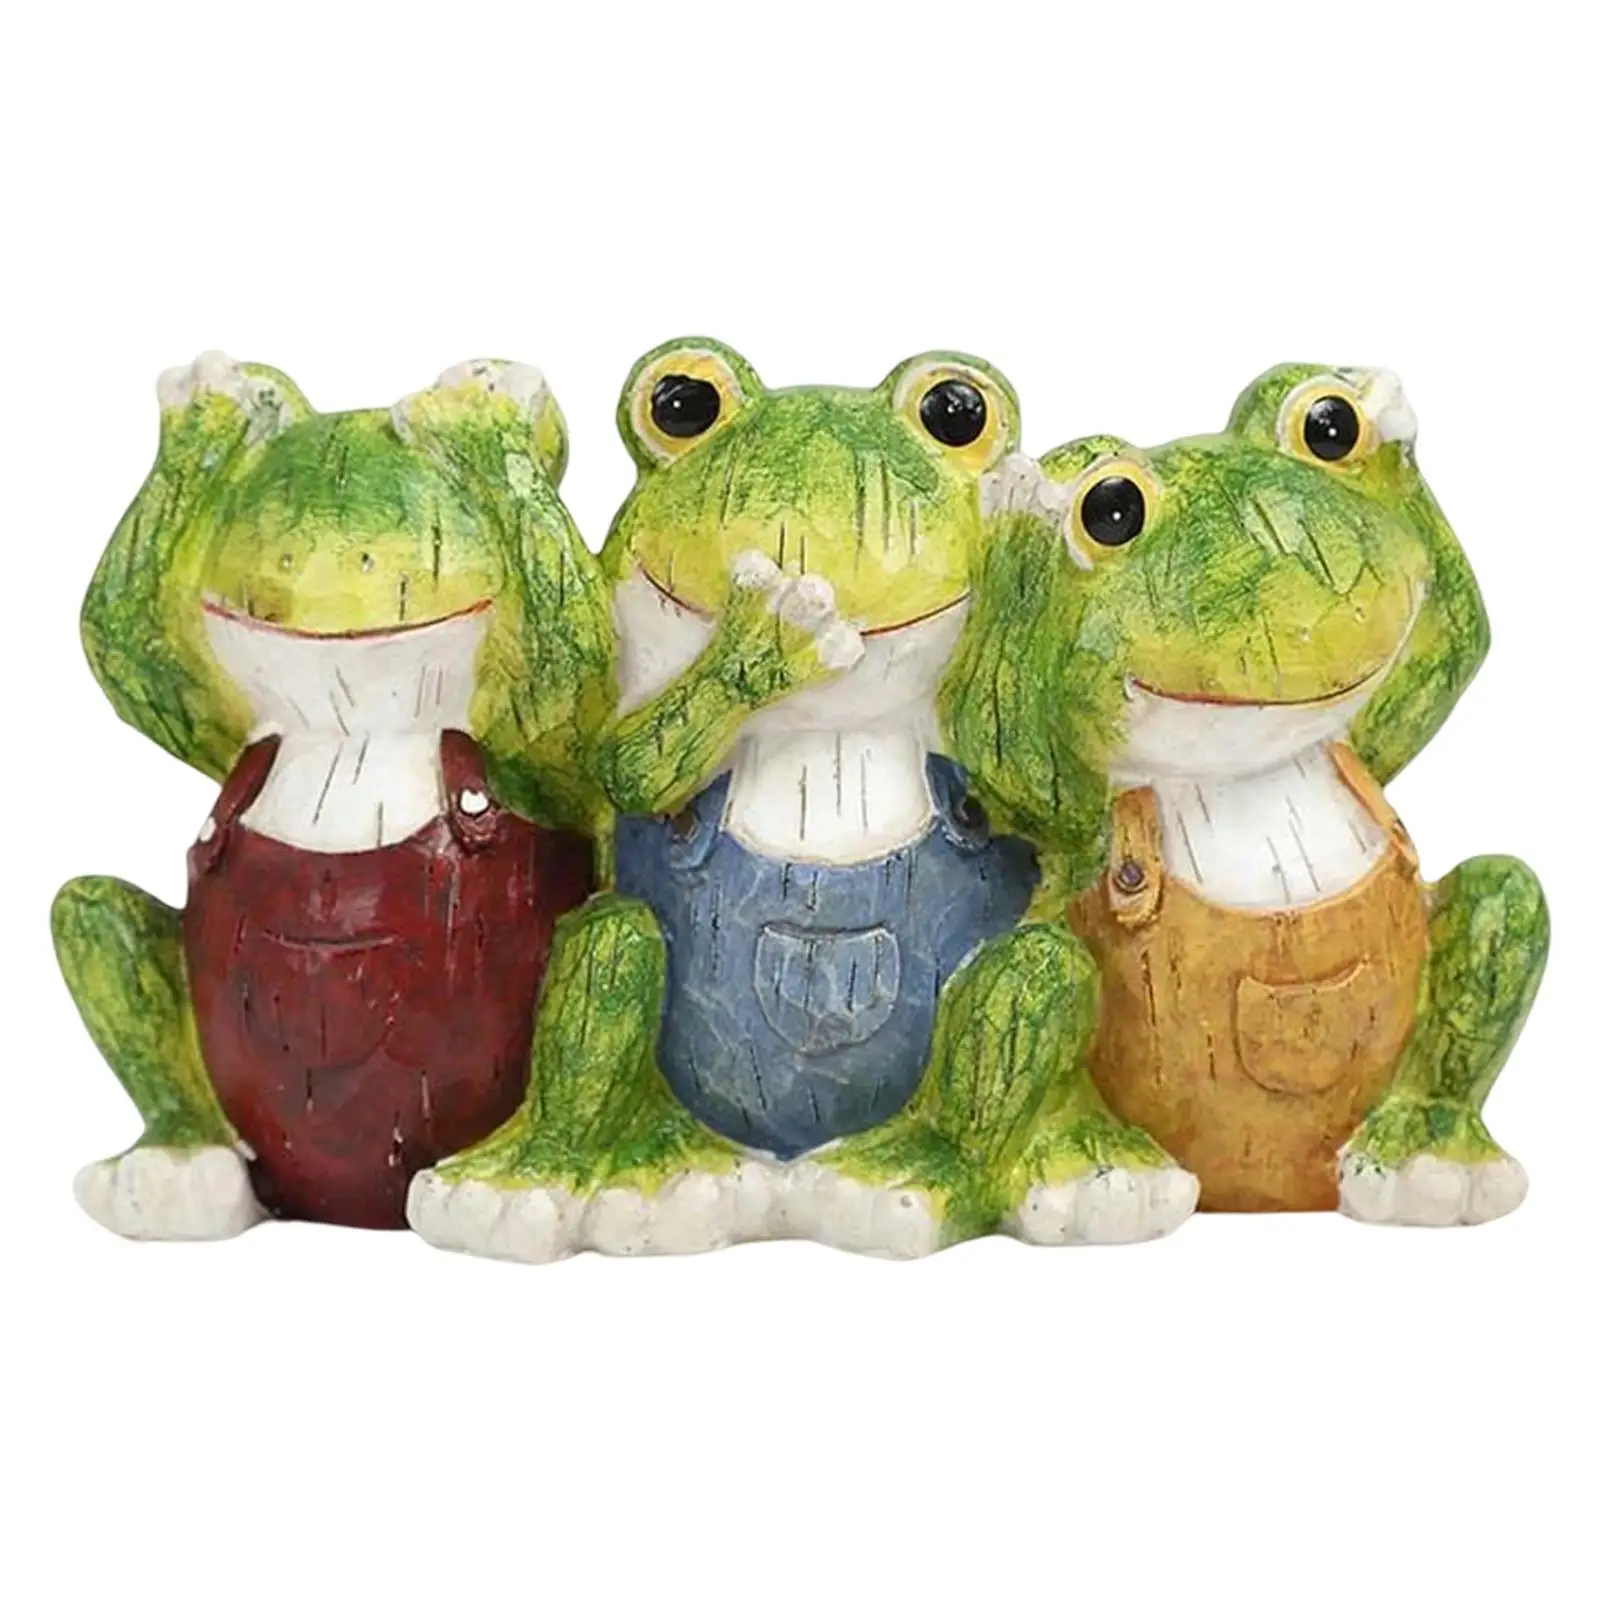 Statue Art Crafts Three Frogs Figurine for Office Decor Porch